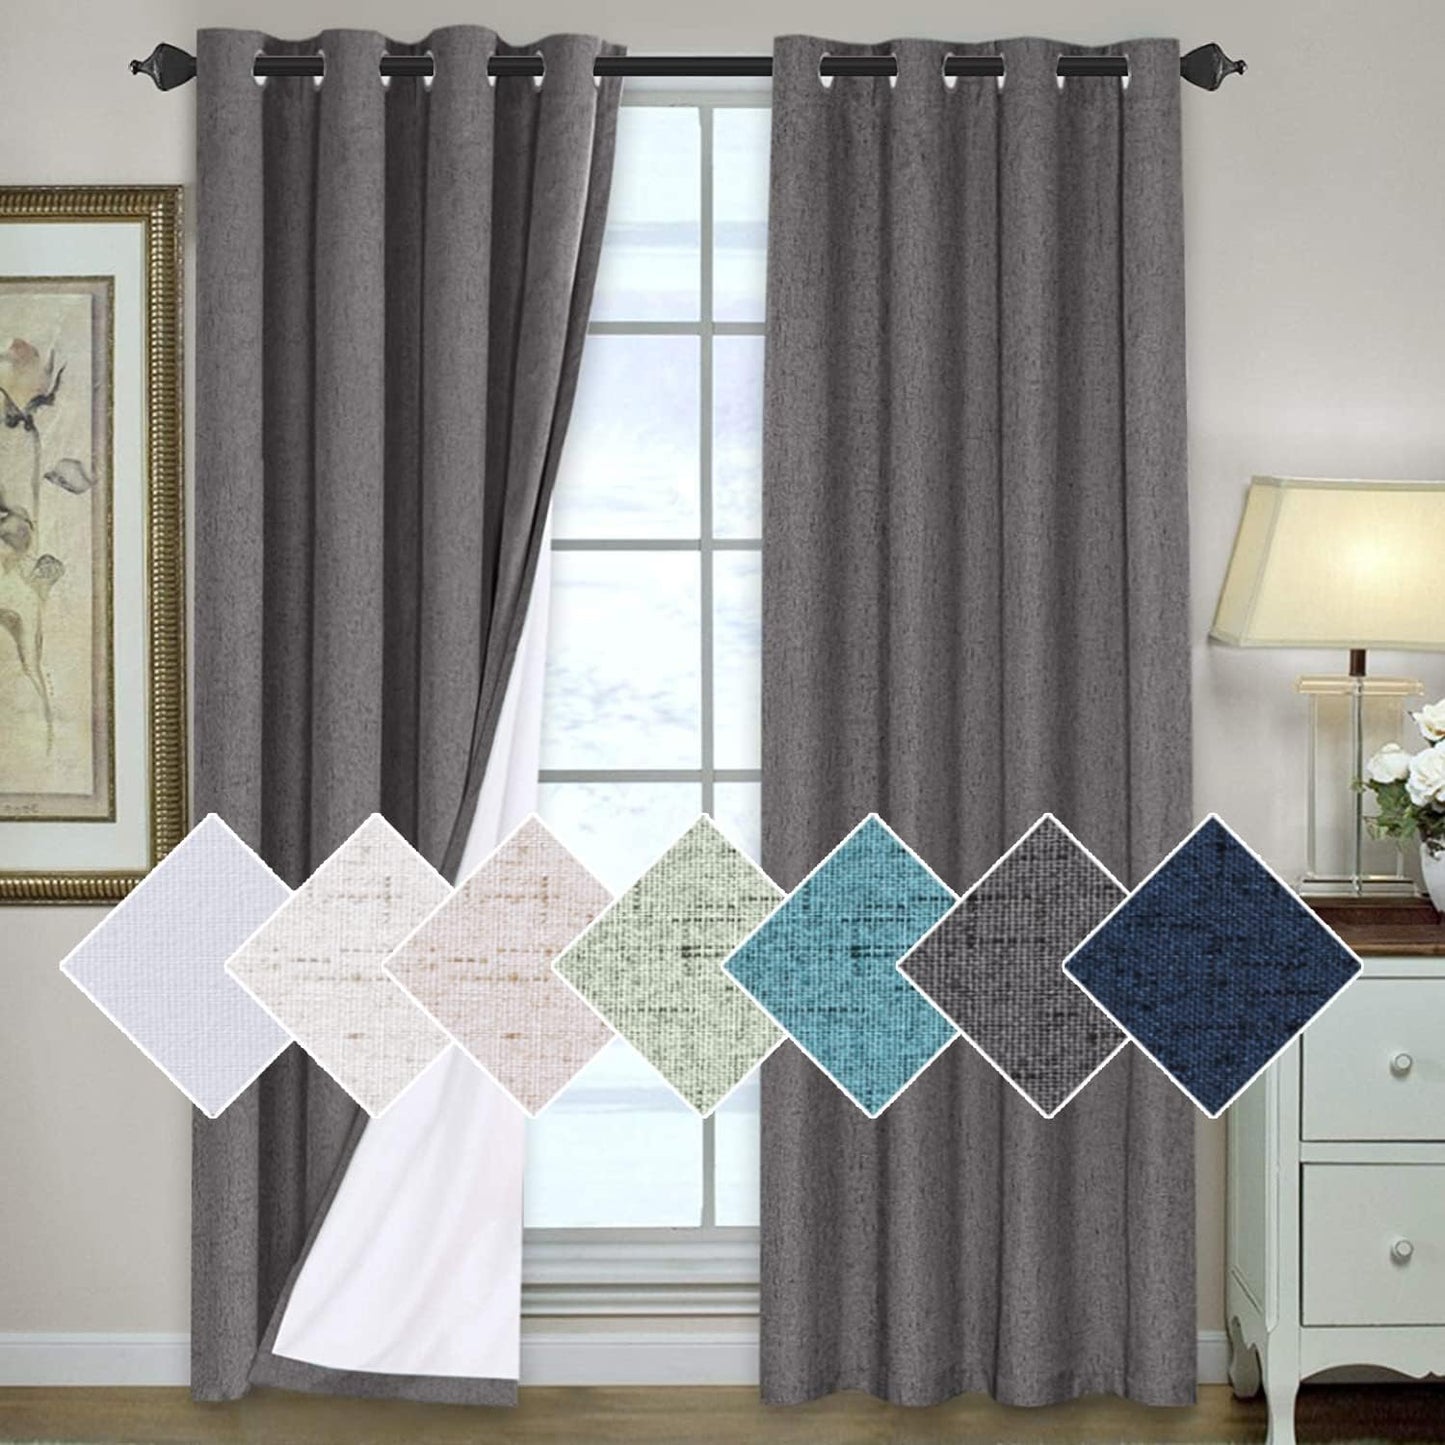 H.VERSAILTEX 100% Blackout Curtains for Bedroom Thermal Insulated Linen Textured Curtains Heat and Full Light Blocking Drapes Living Room Curtains 2 Panel Sets, 52X84 - Inch, Natural  H.VERSAILTEX Grey 2 Panel - 52"W X 108"L 